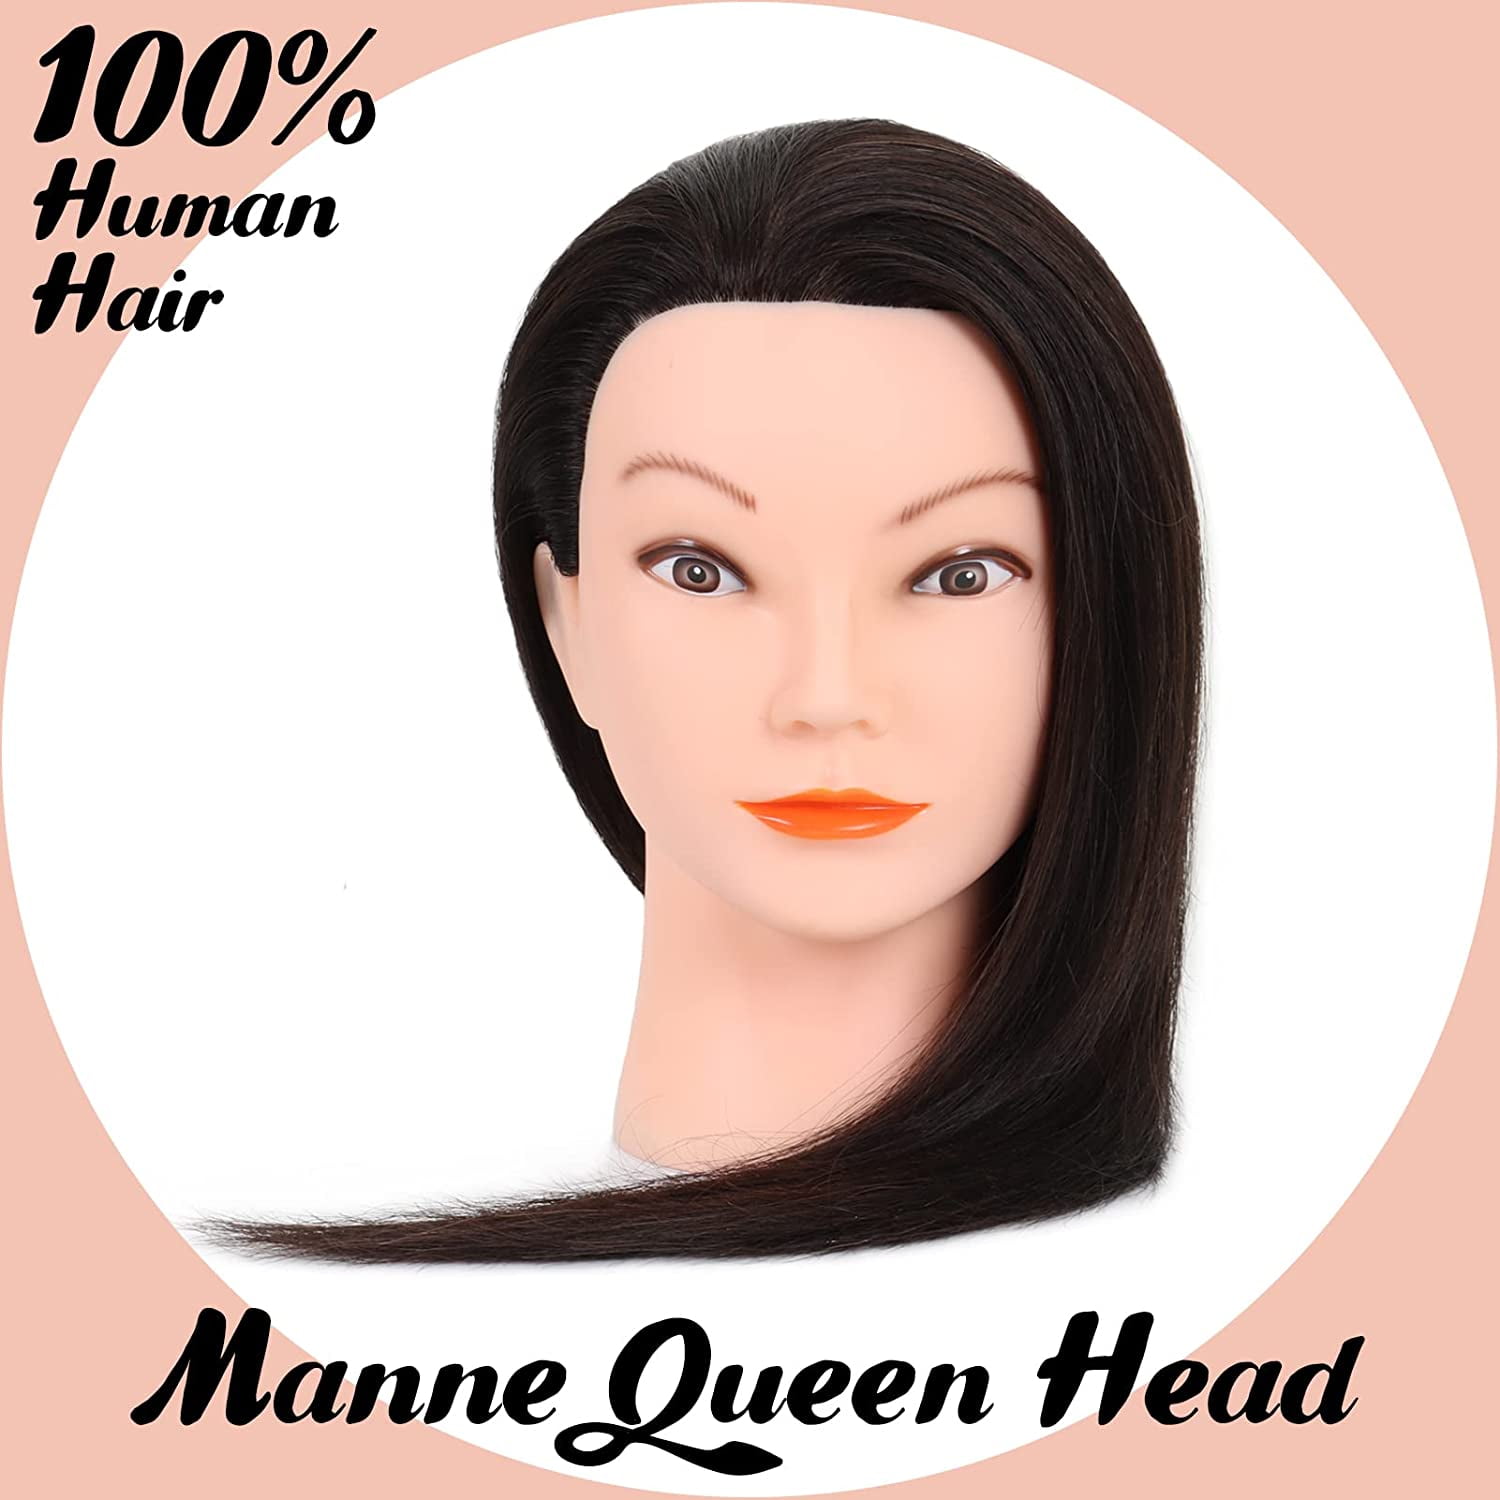 Mannequin Head with Human Hair for Styling 20 Inch Manikin Practice Head  for Braiding Training styling Head Brown Color Besstown : : Beauty